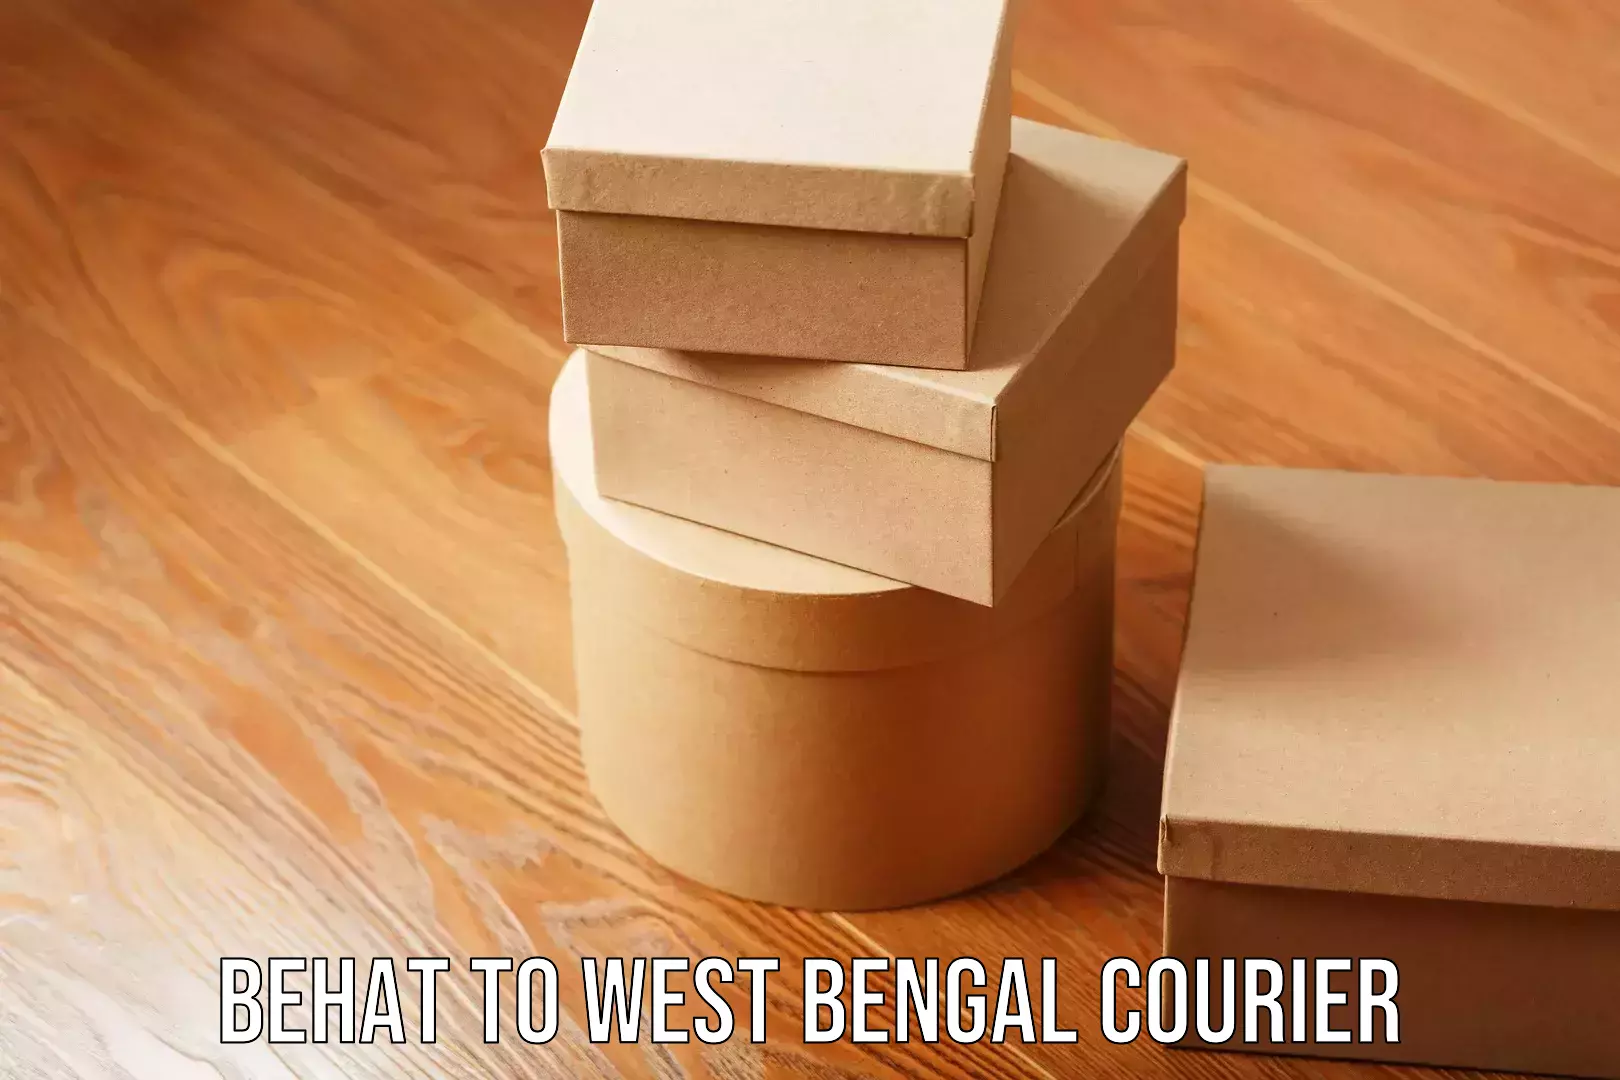 Multi-city courier Behat to West Bengal